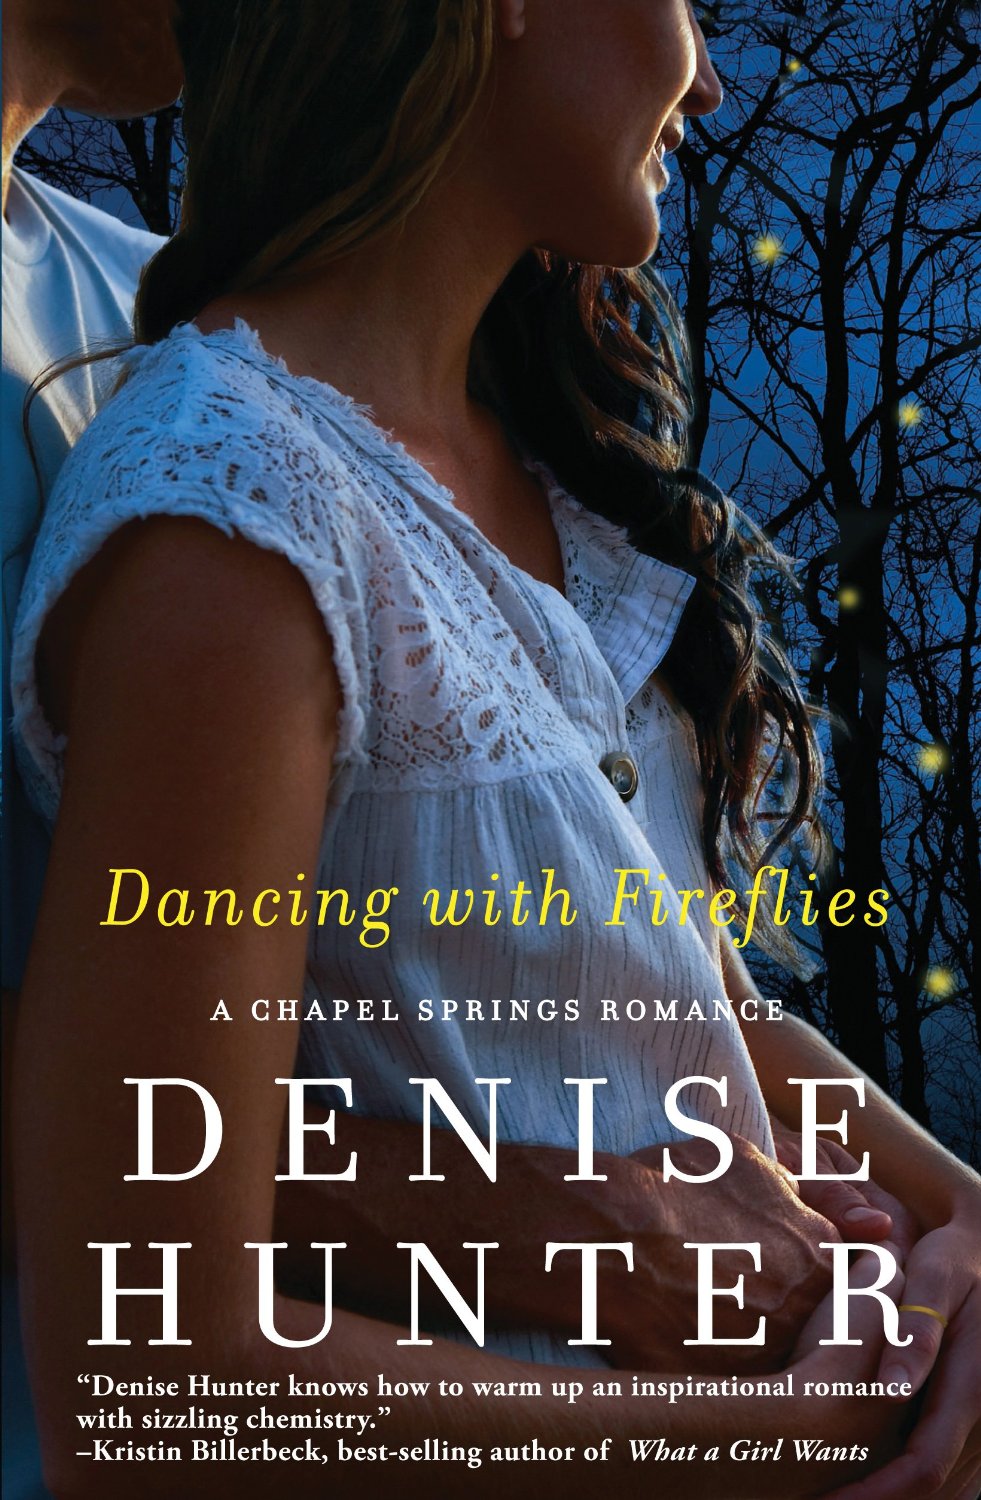 Book Review: Dancing with Fireflies by Denise Hunter